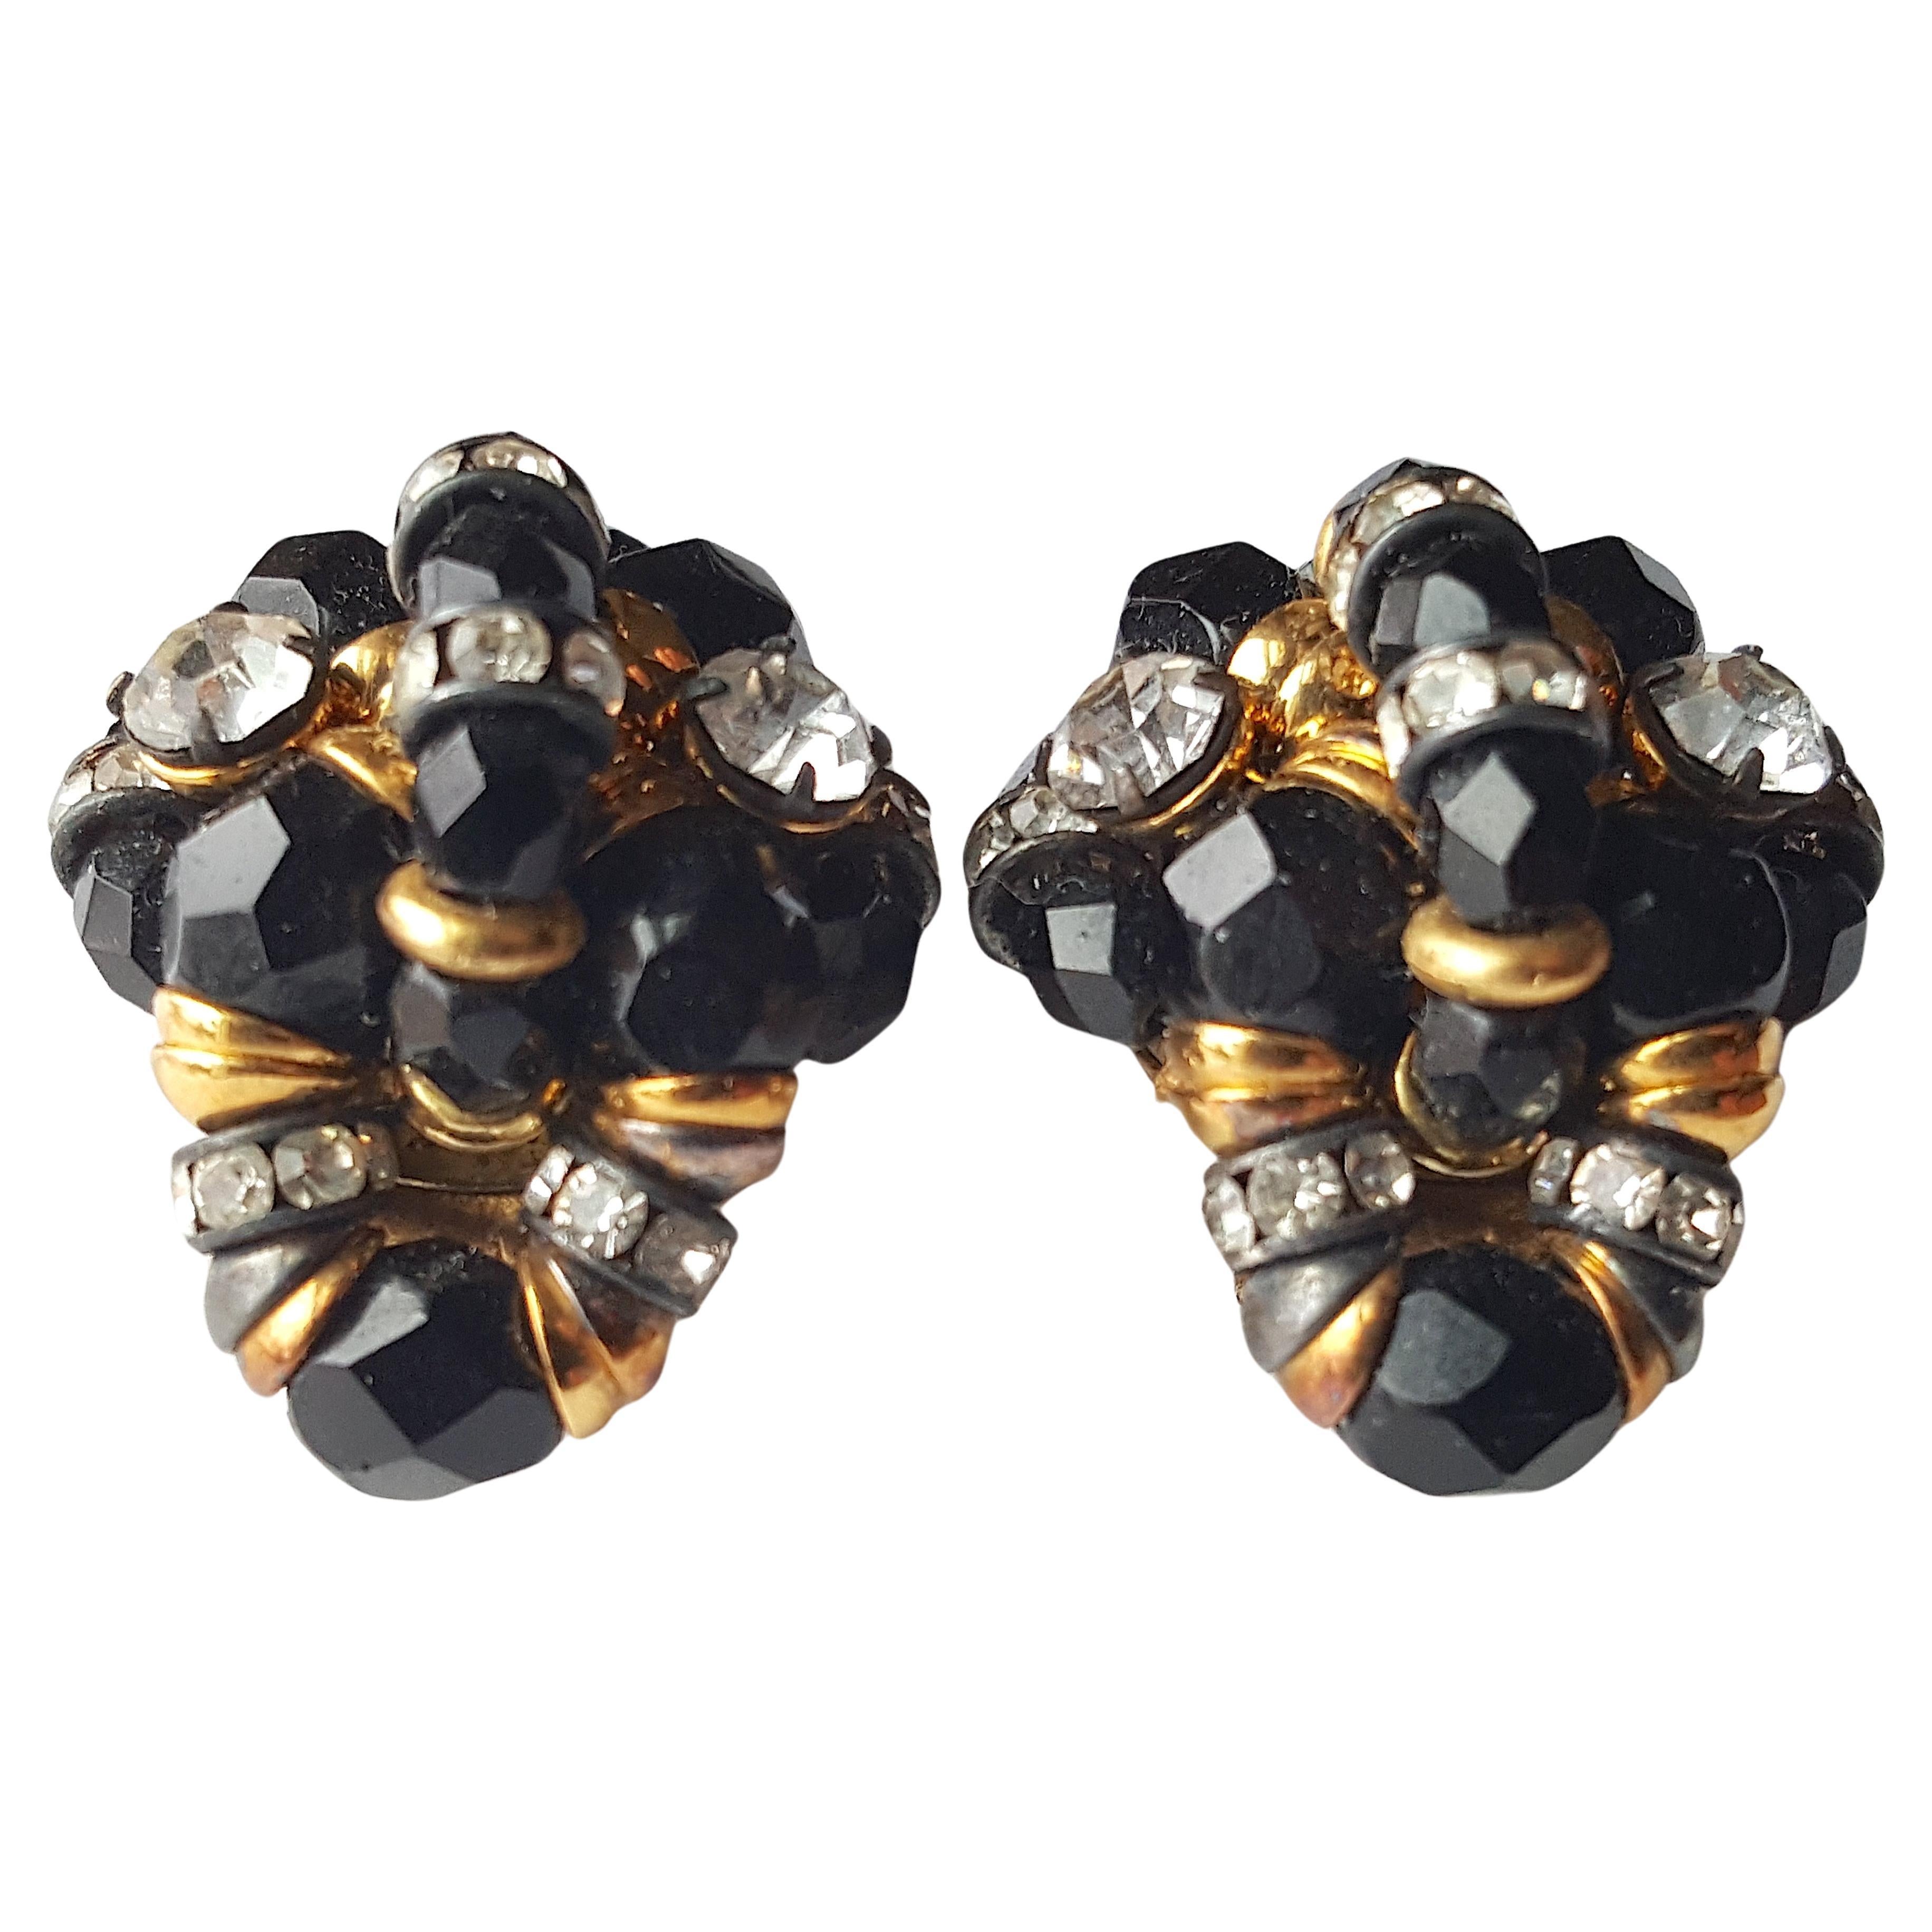 Taille mixte Couture Montague 1950s French WiredGlassBeads CrystalEnameledRondelles Earrings en vente